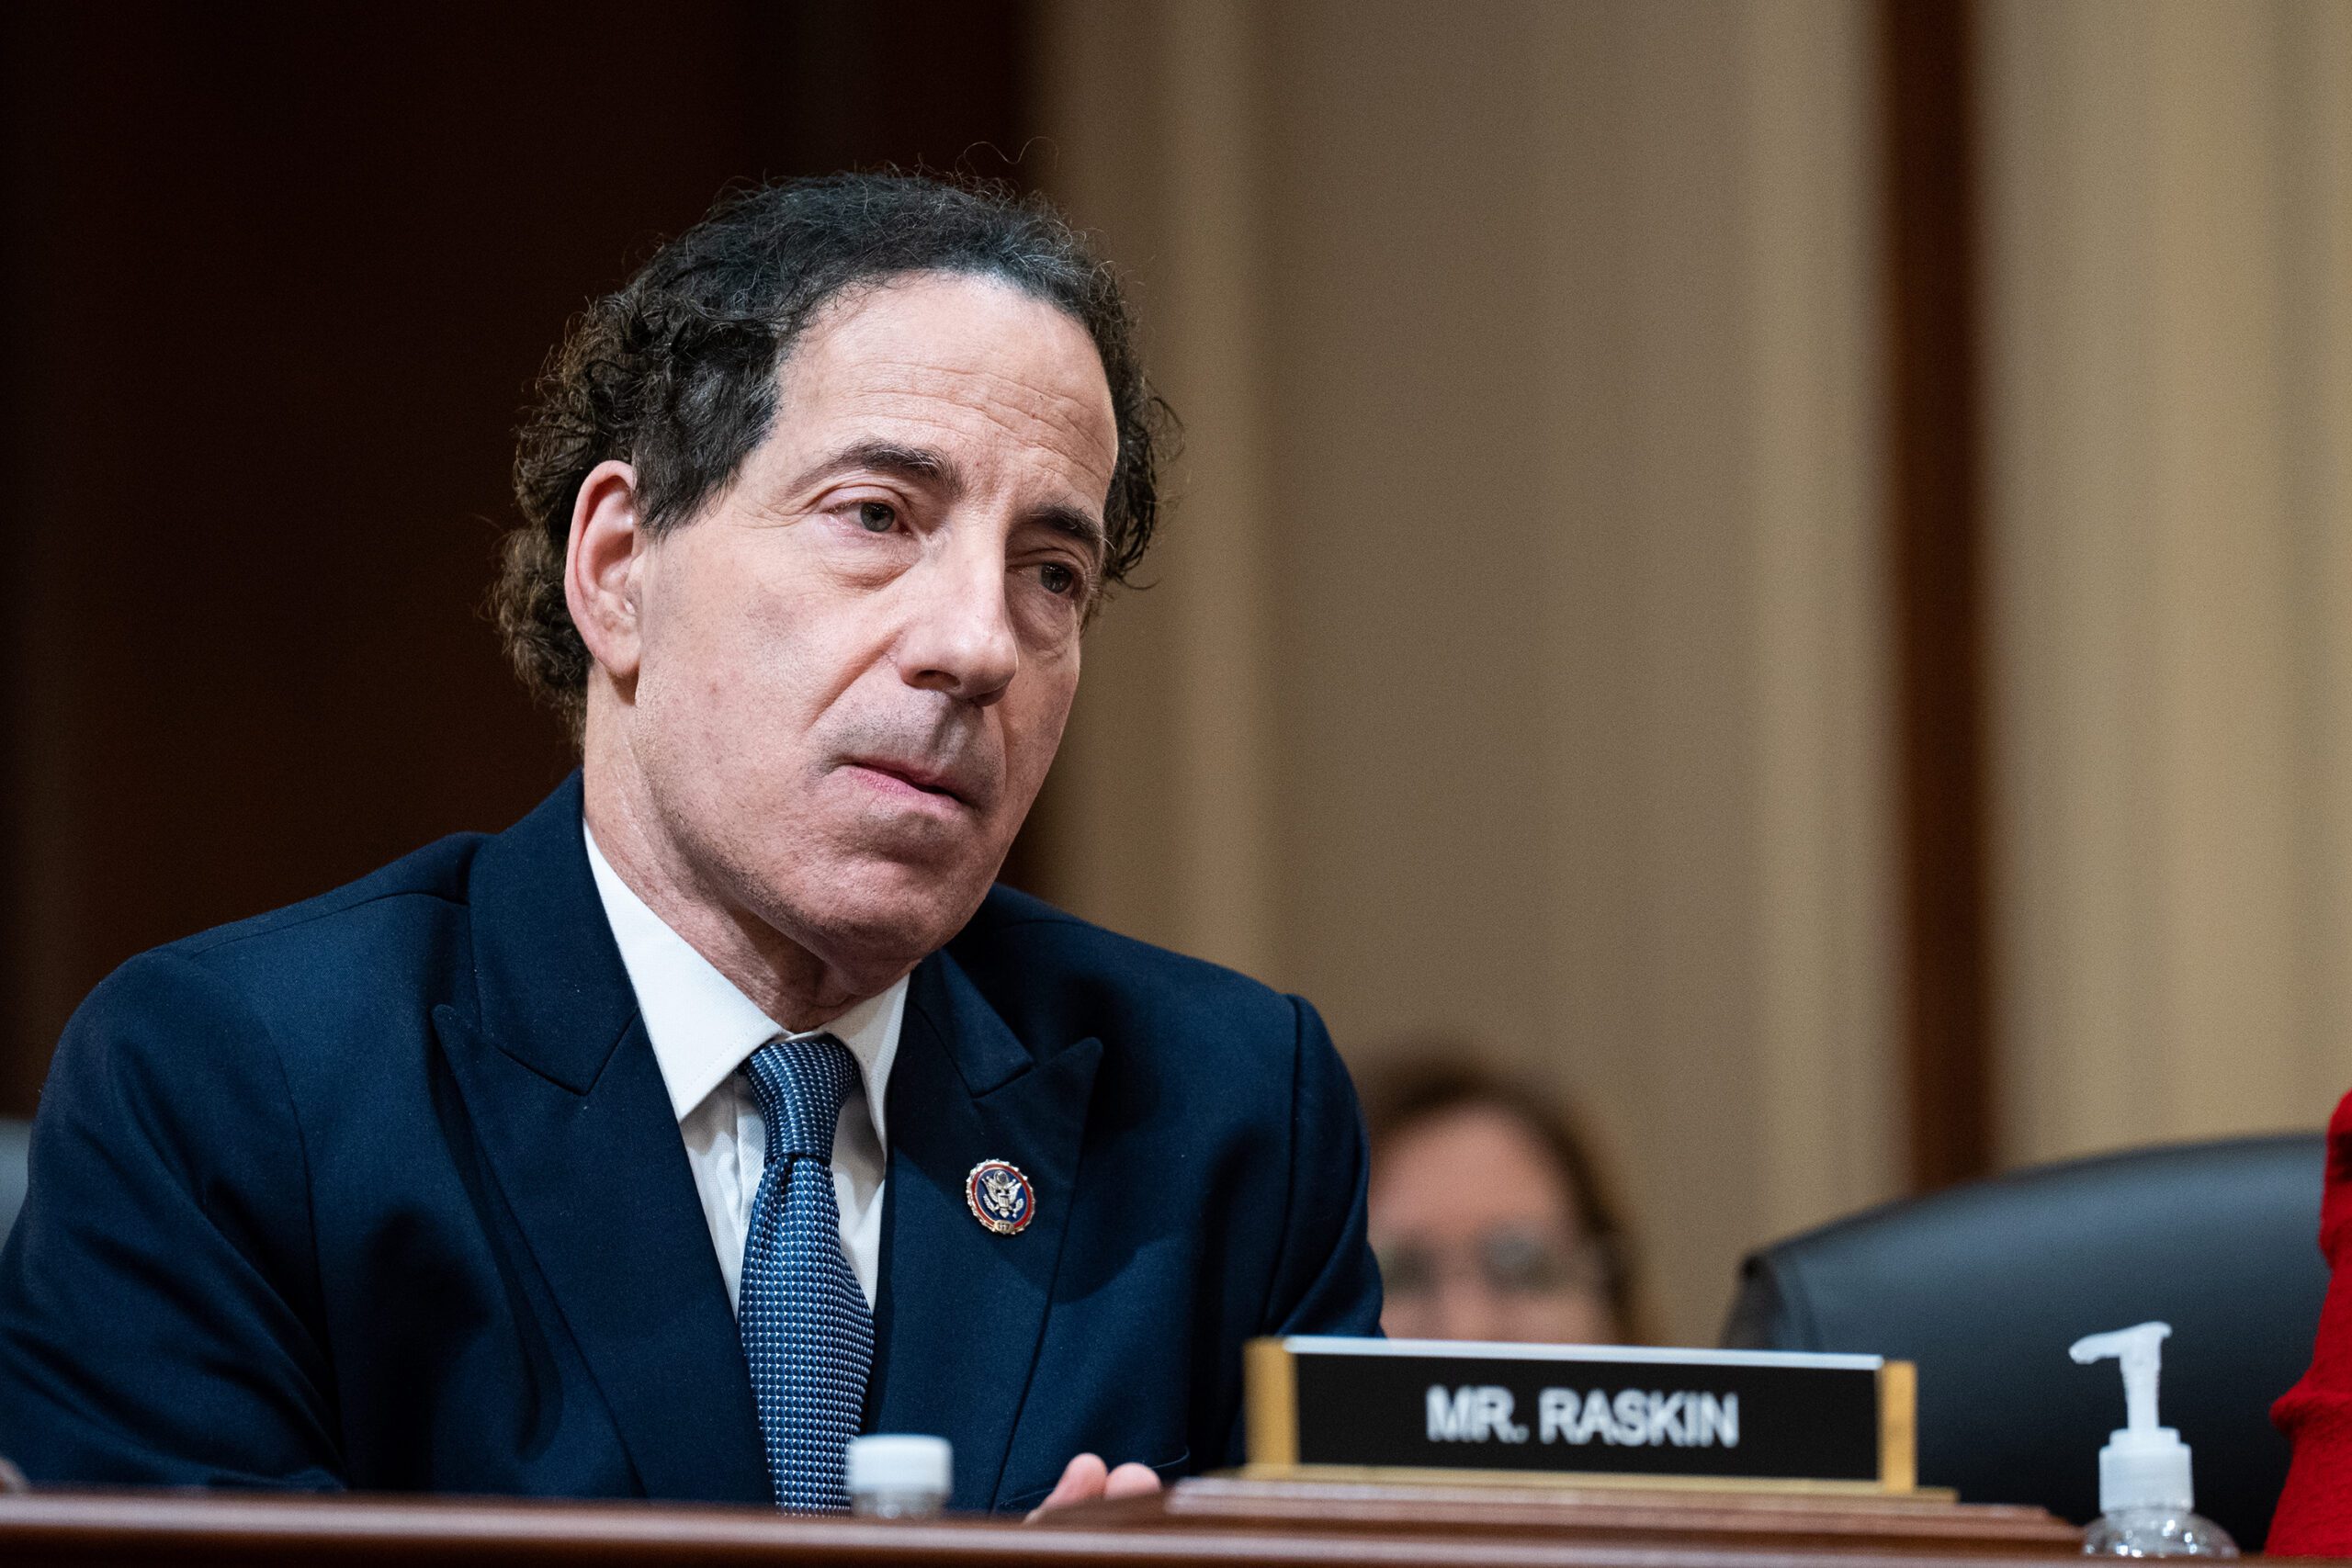 Jamie Raskin has been trying to warn us about White Supremecist violence